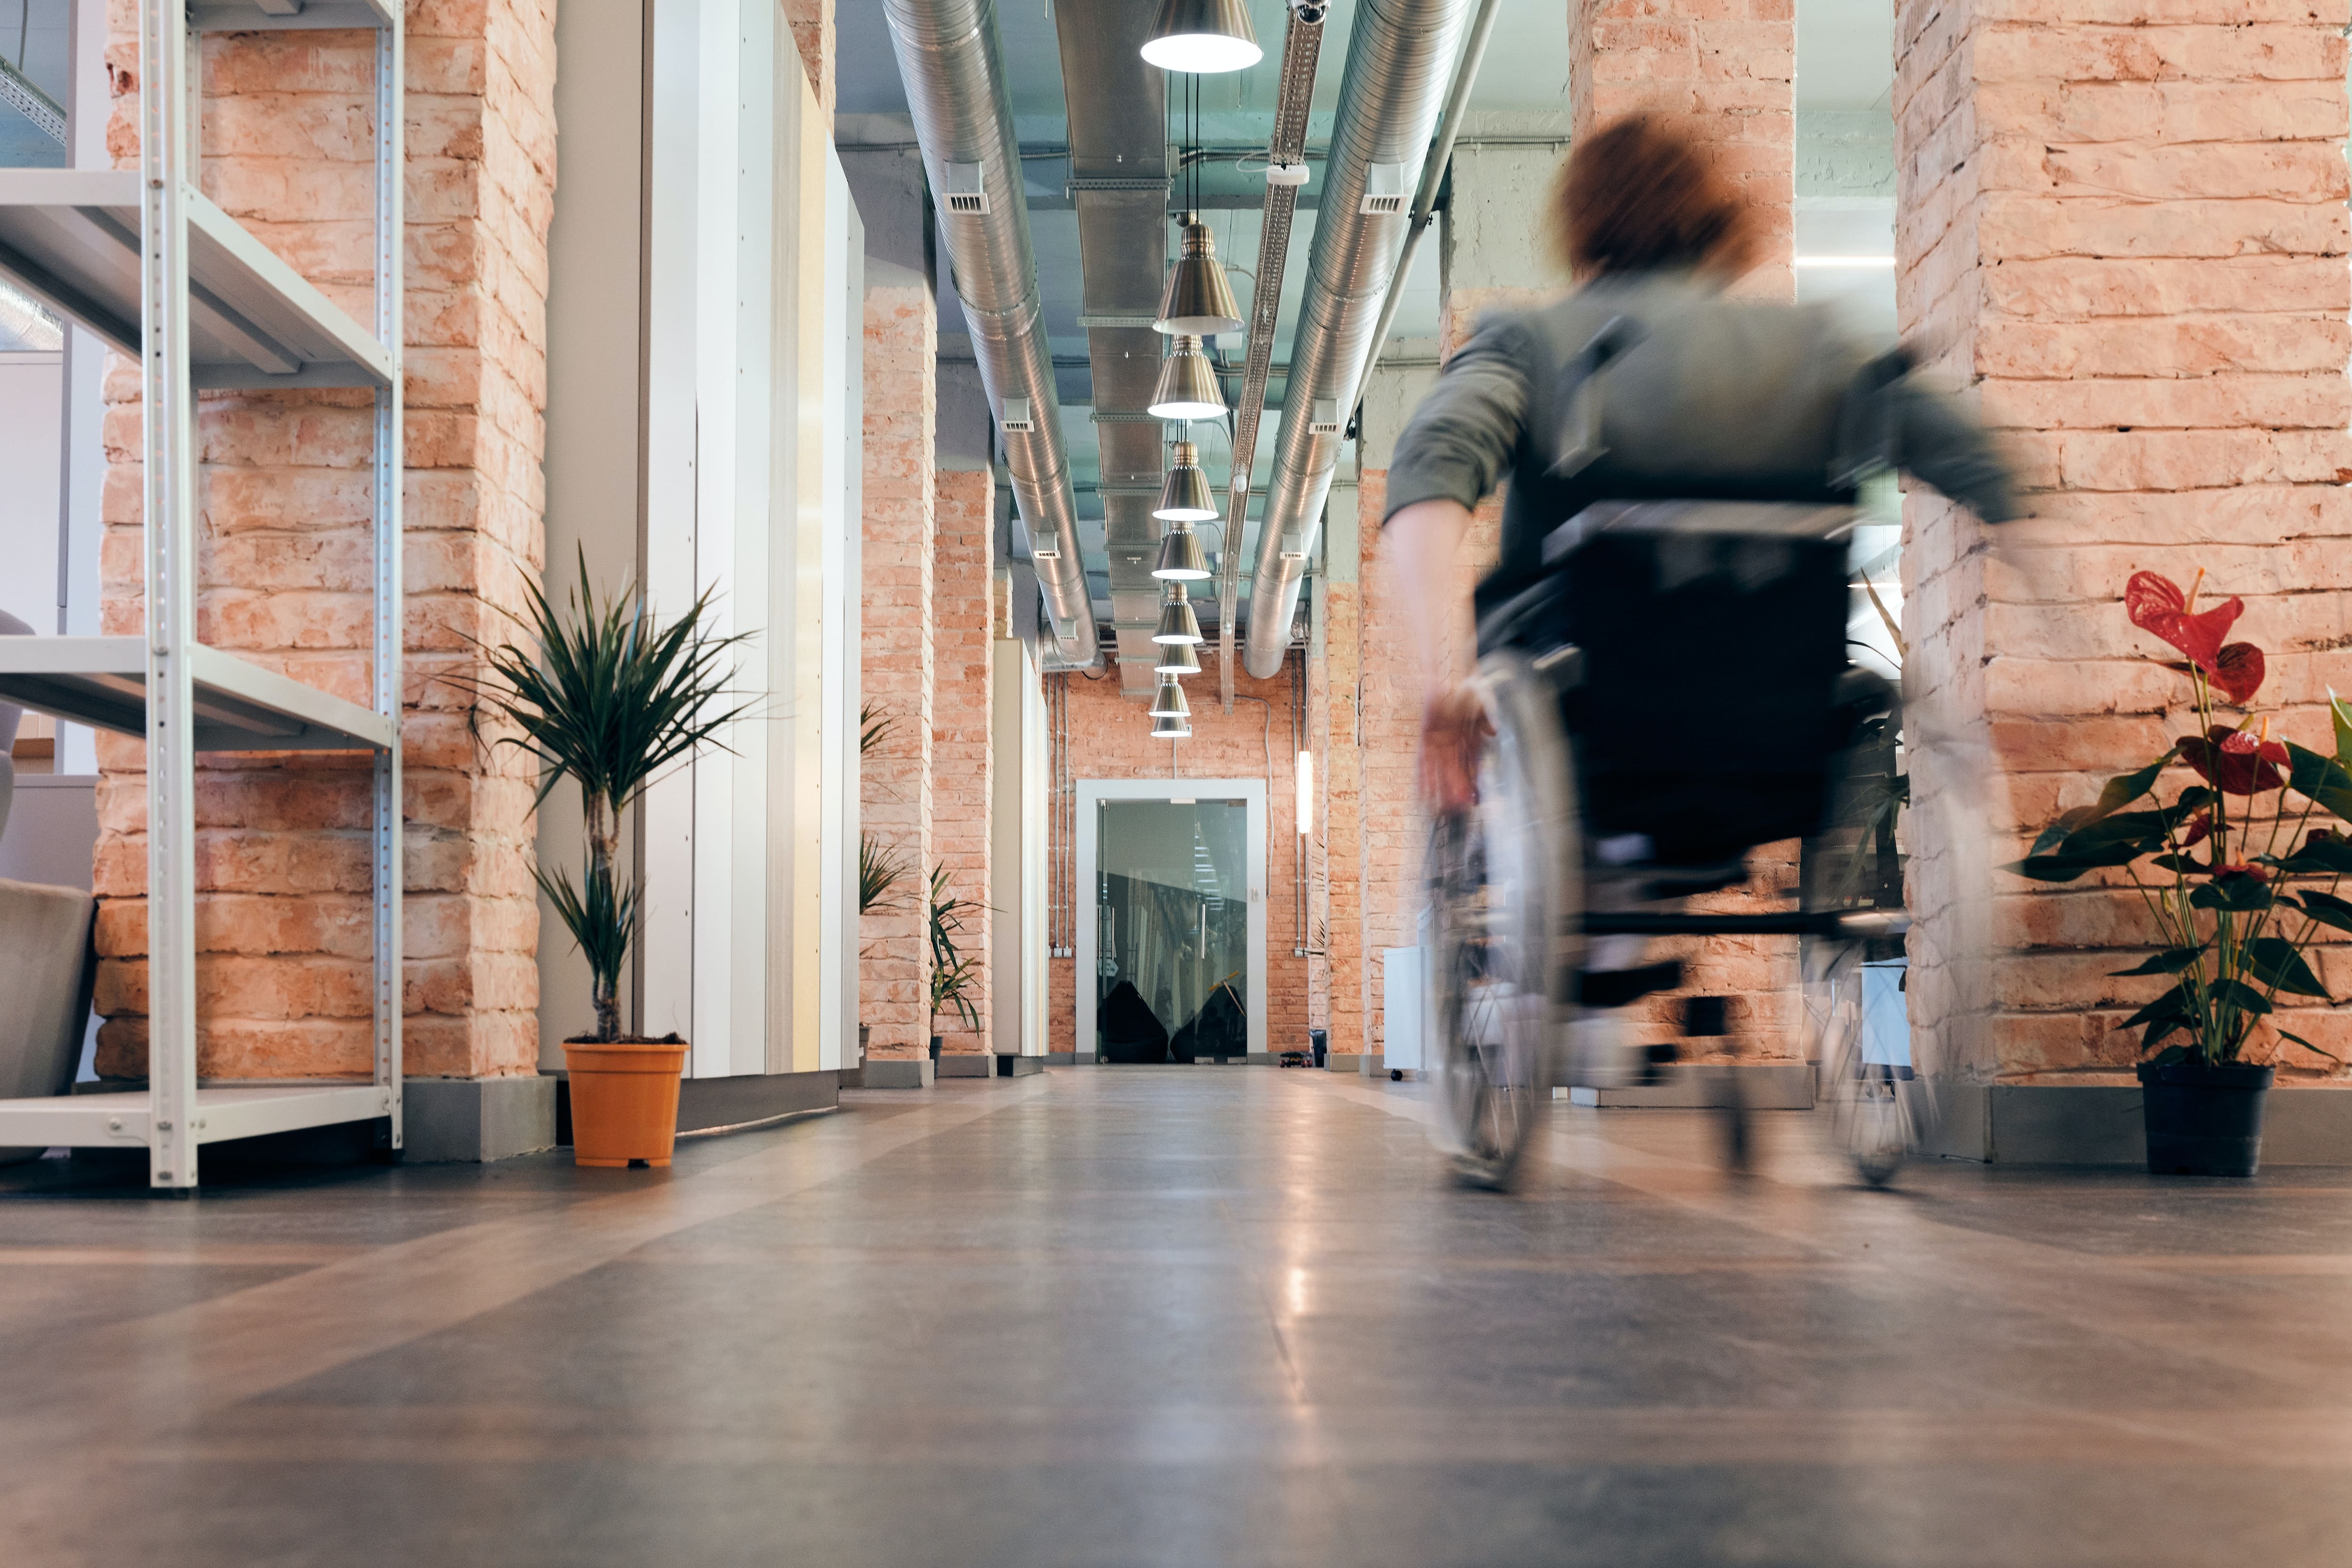 Image of employee in a wheelchair at an office